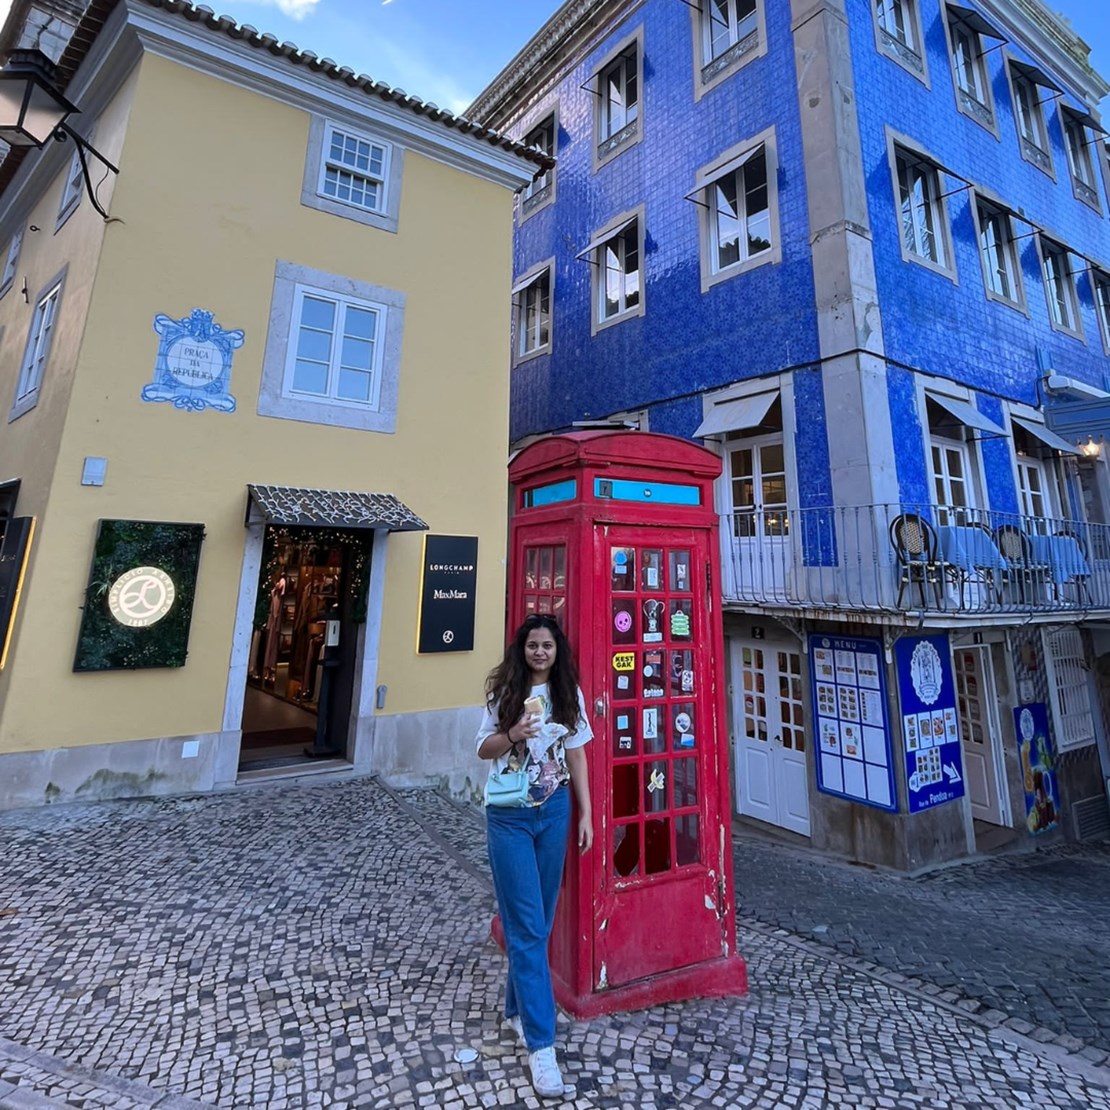 Gazzal in front of some colourful buildings in Portugal